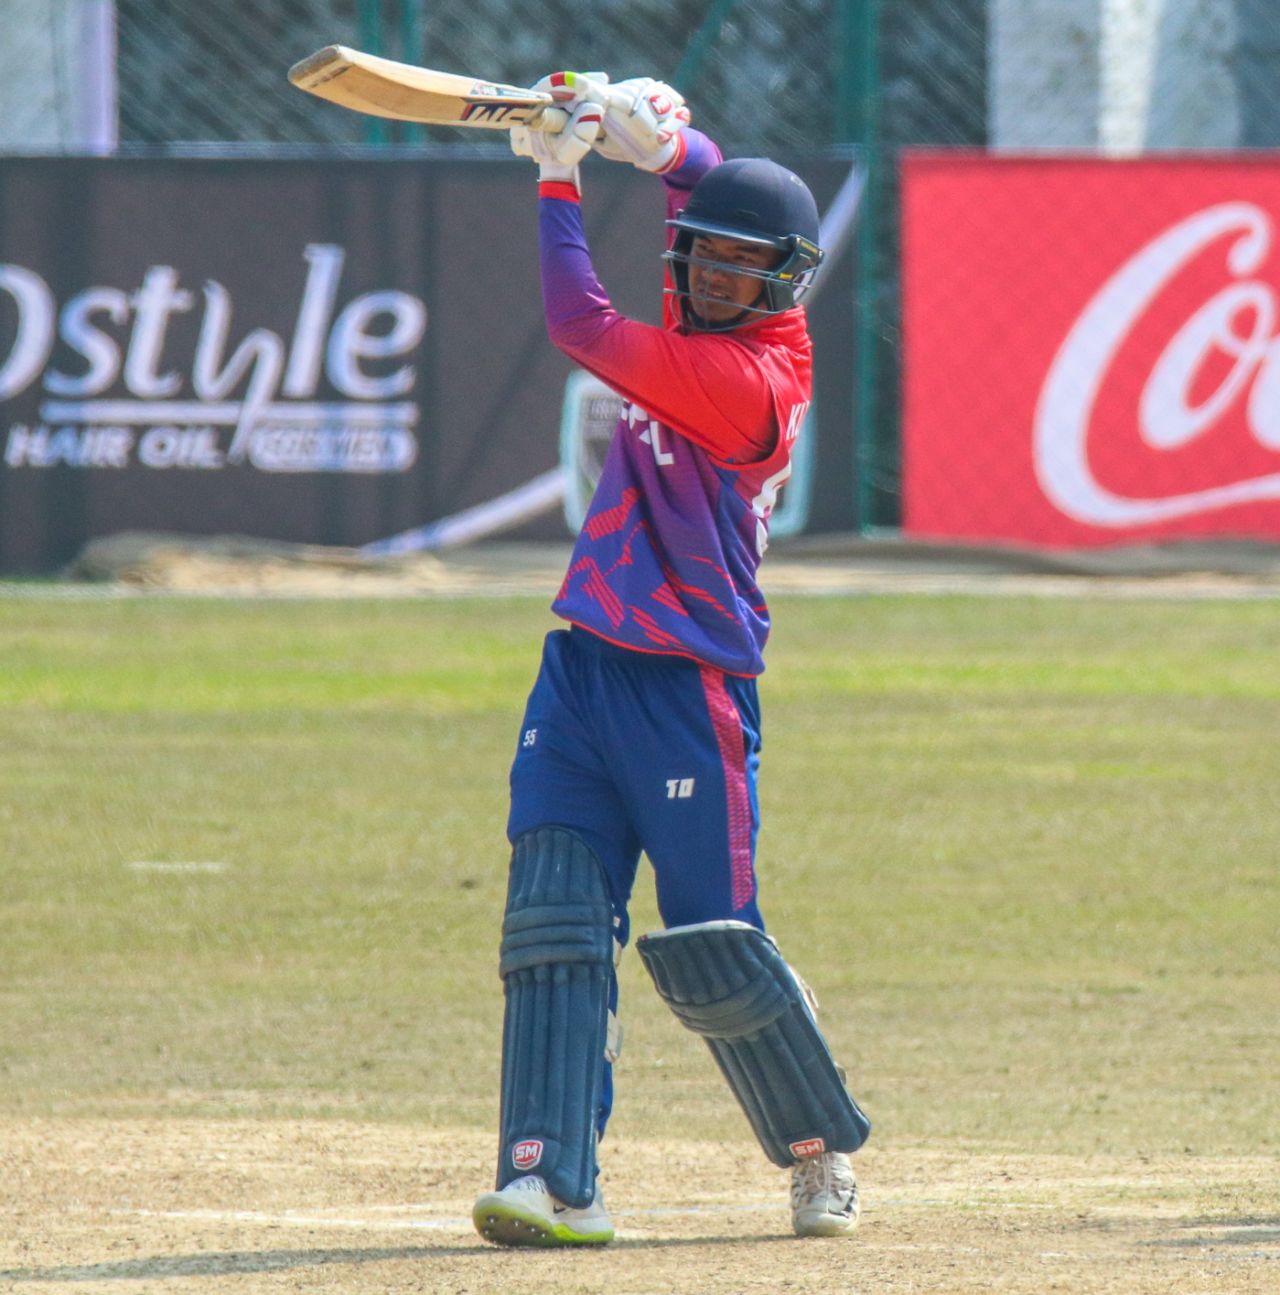 Kushal Malla drives over mid-off for a boundary, Nepal v Oman, ICC Cricket World Cup League Two tri-series, Kirtipur, February 8, 2020